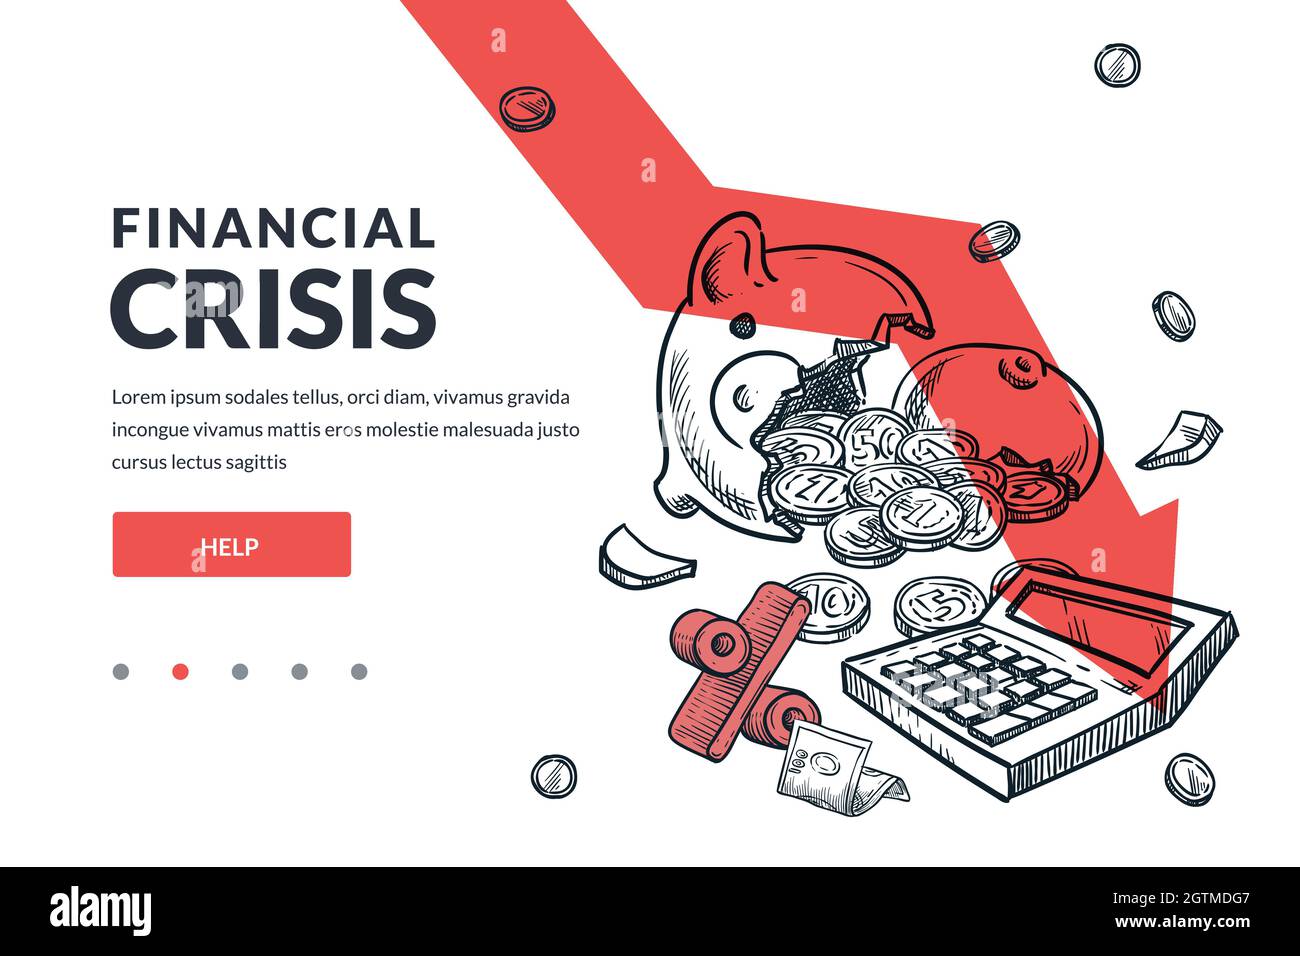 Economic crisis, financial losses, bankruptcy concept. Broken piggy bank, percent sign, calculator on falling down red arrow background. Hand drawn ve Stock Vector